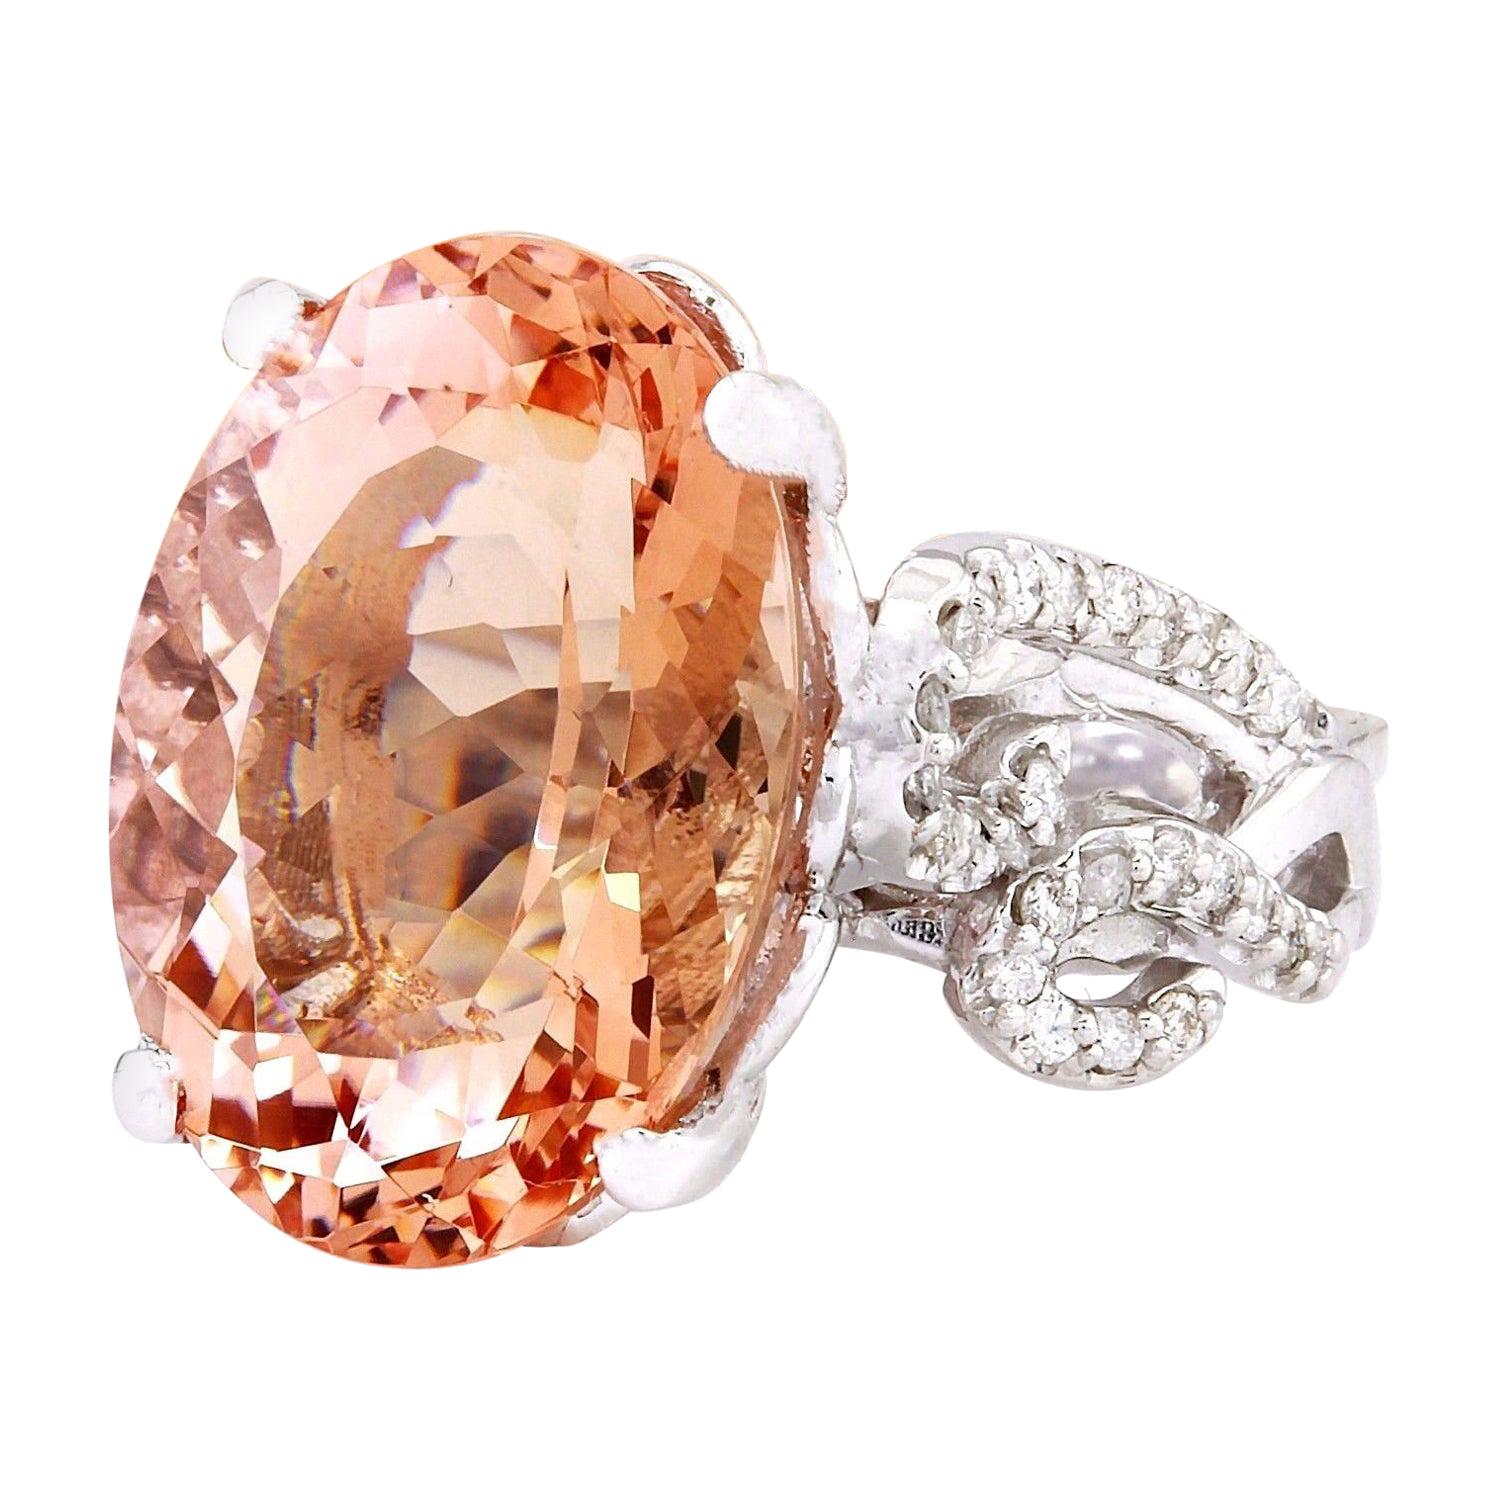 11.30 Carat Natural Morganite 14K Solid White Gold Diamond Ring
 Item Type: Ring
 Item Style: Cocktail
 Material: 14K White Gold
 Mainstone: Morganite
 Stone Color: Peach
 Stone Weight: 11.00 Carat
 Stone Shape: Oval
 Stone Quantity: 1
 Stone